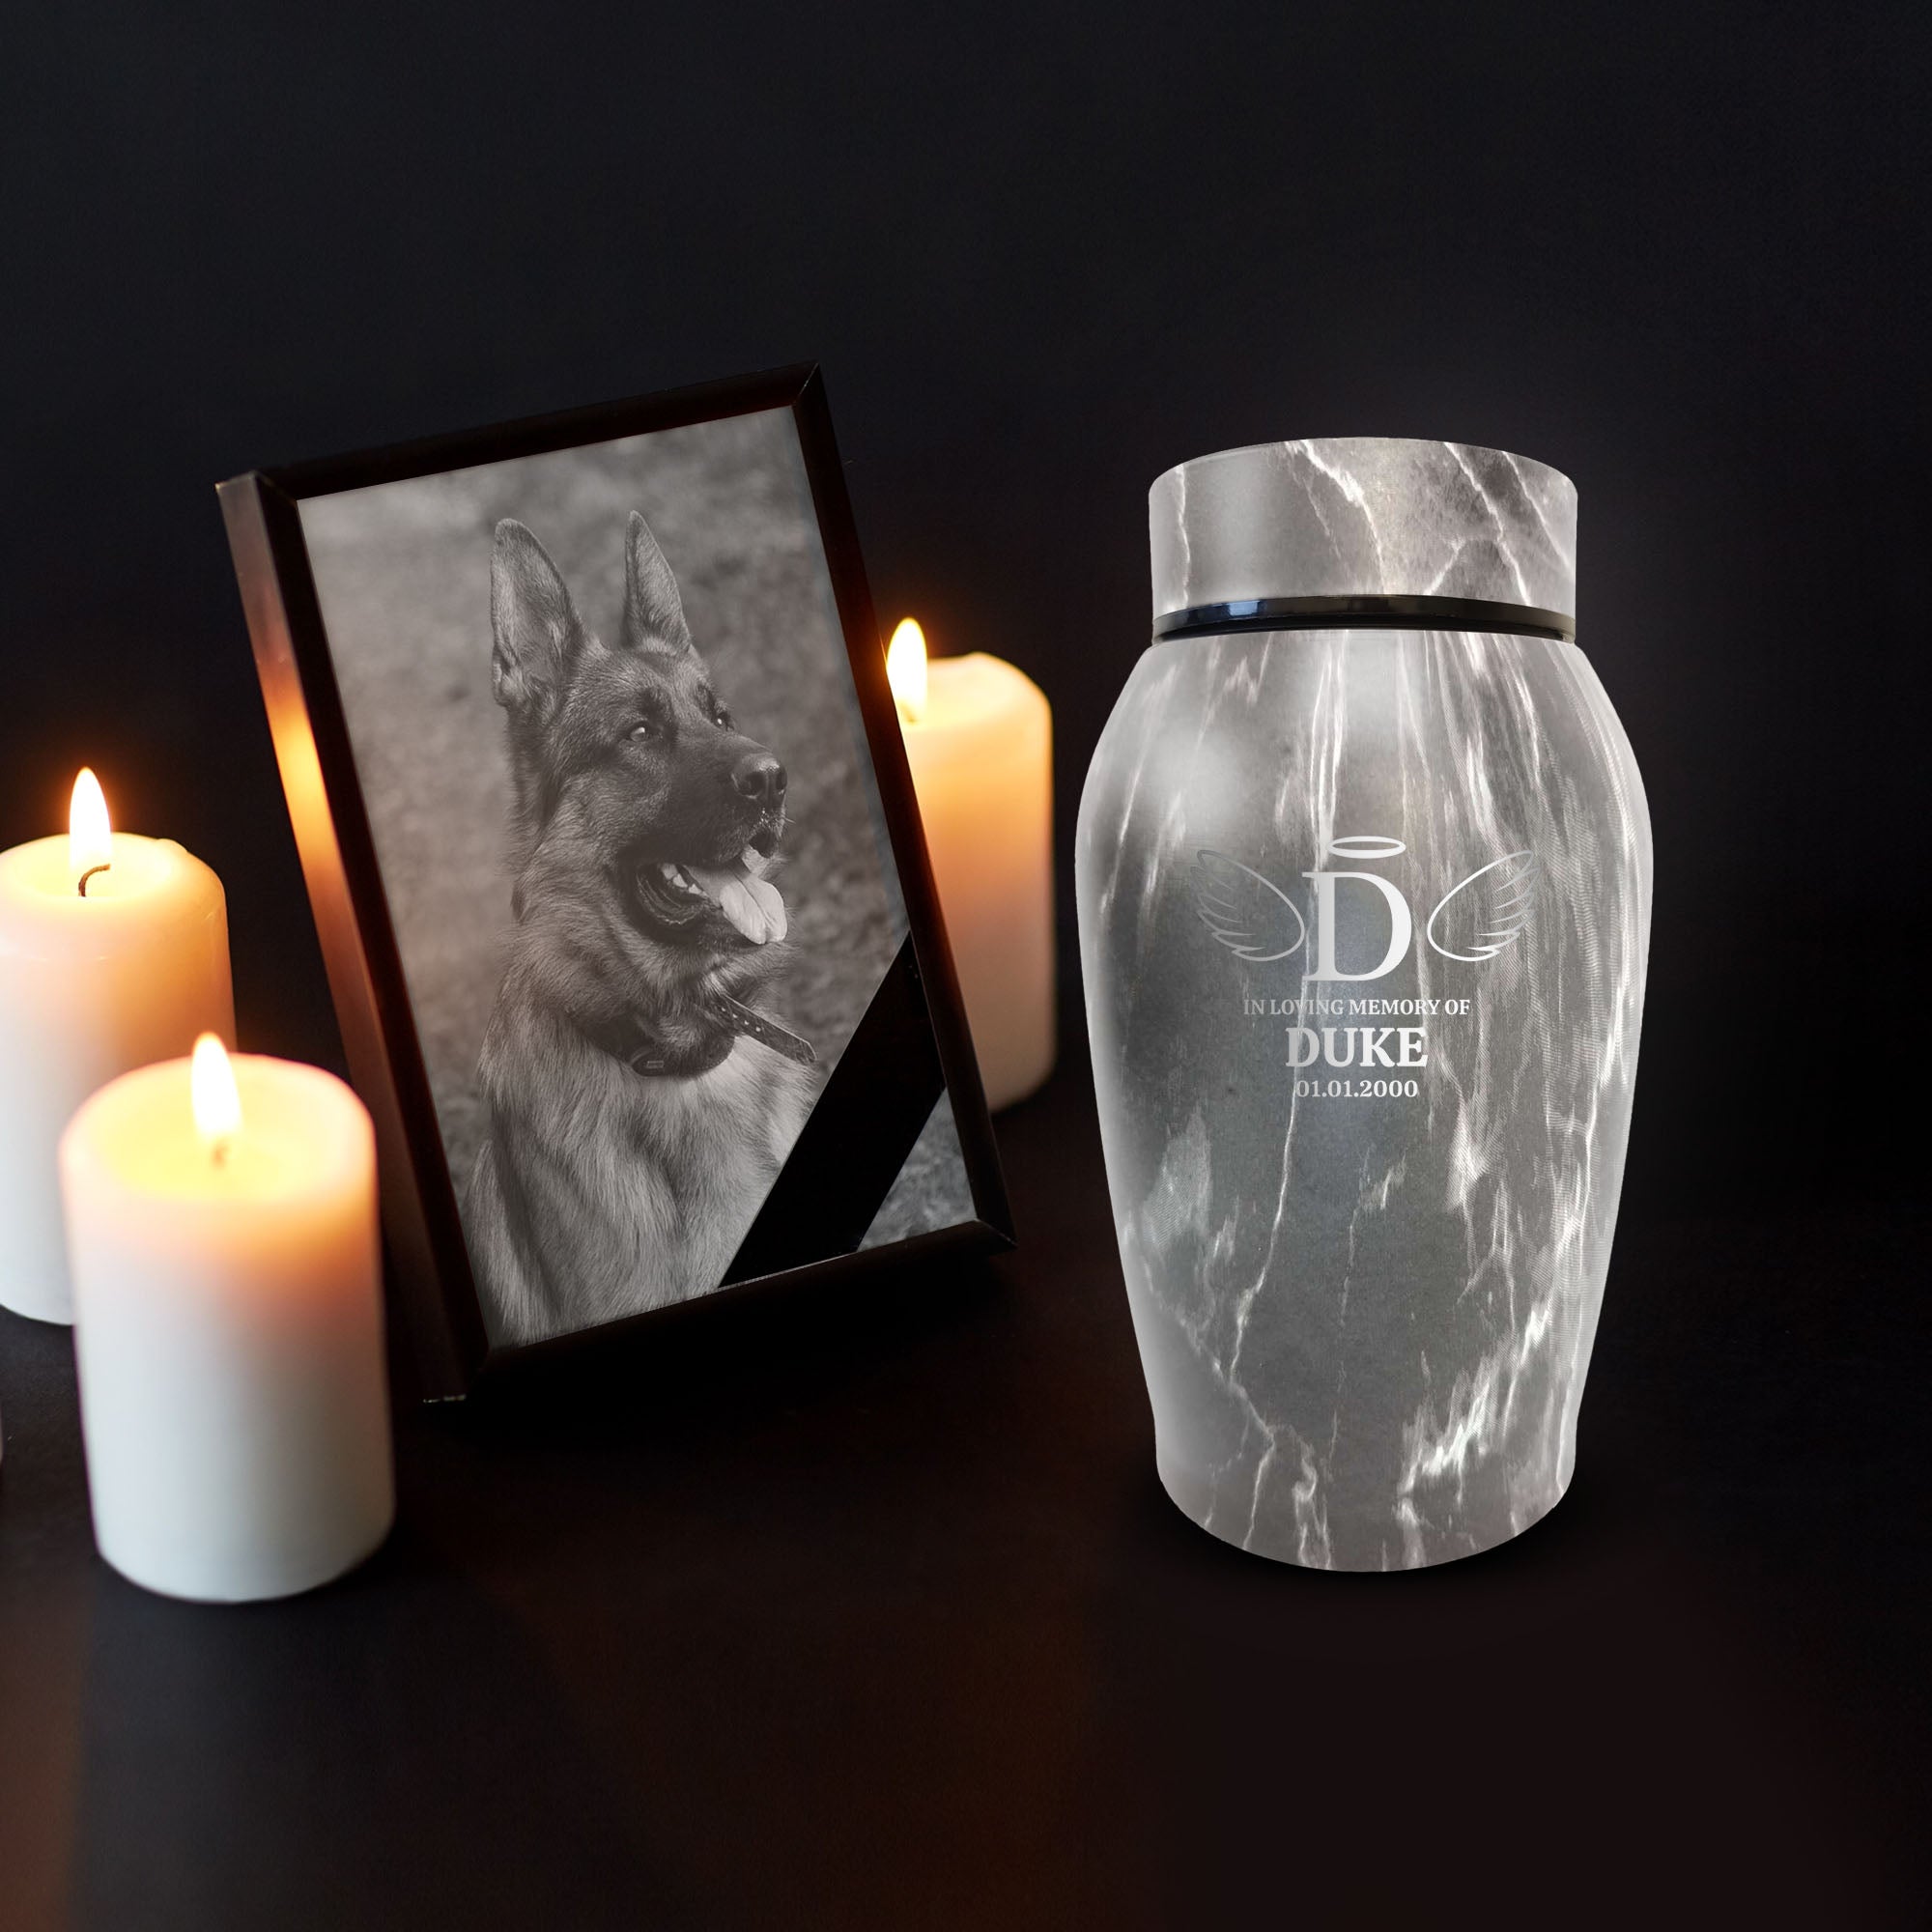 Personalized Stone Gray Dog Urn: Engraved Dog Name and Date - Stainless Steel Cremation Urns for Cat Ashes with Airtight Closure | Stone Gray